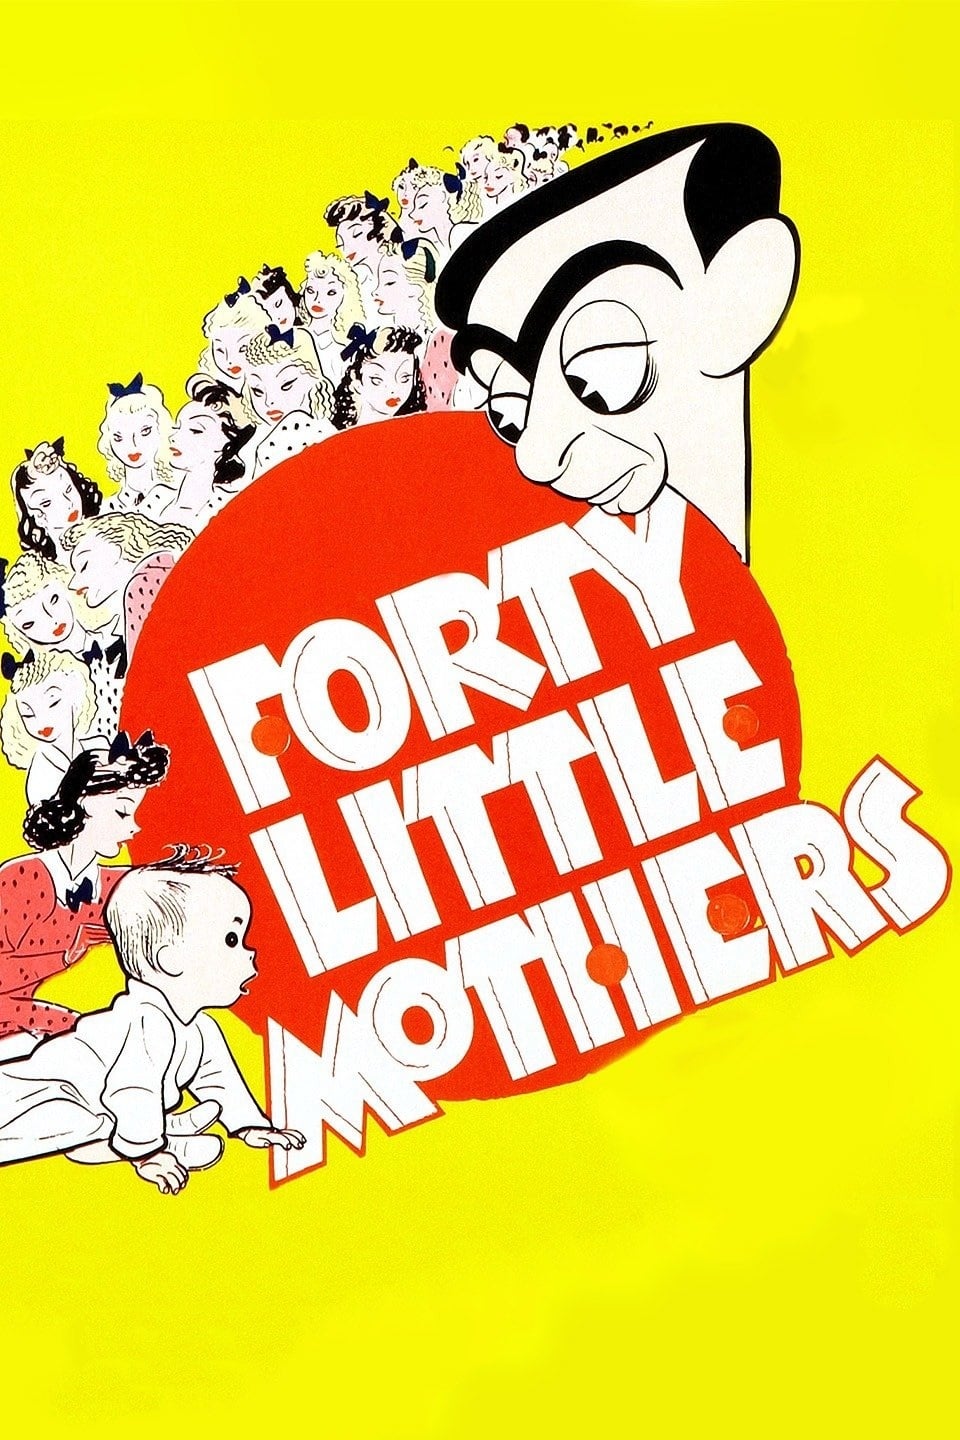 Forty Little Mothers (1940)